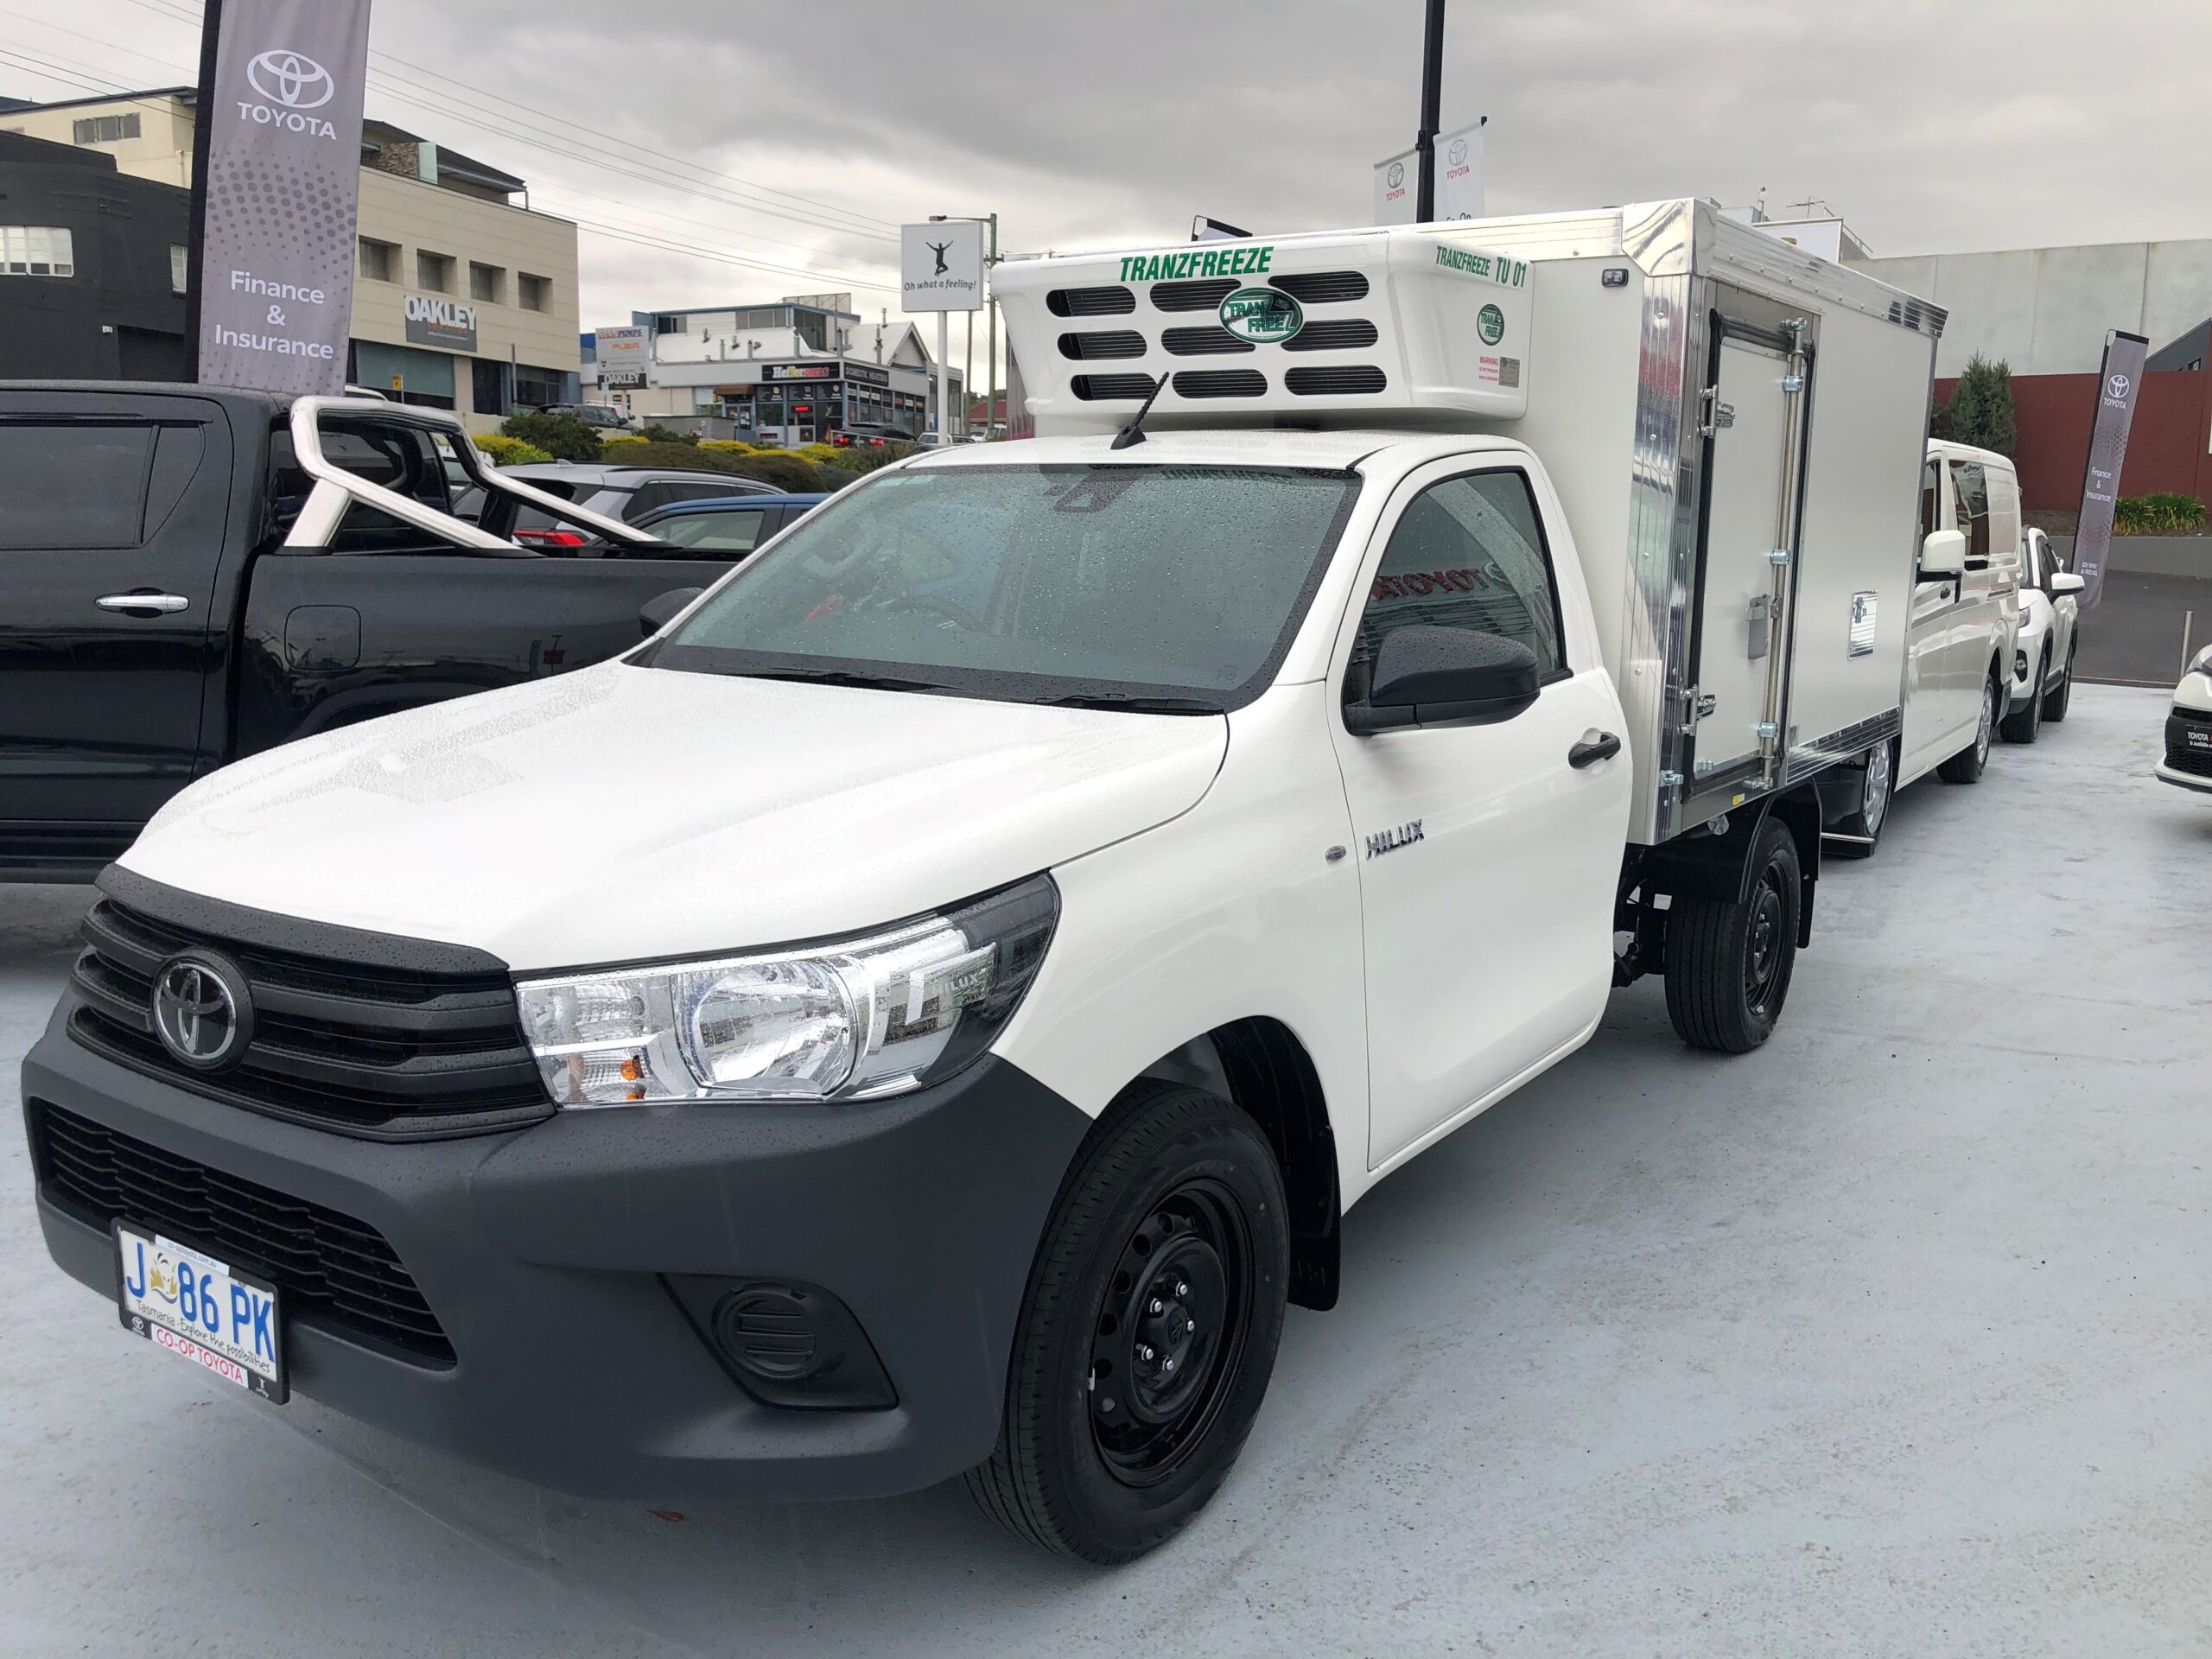 Hilux refrigerated